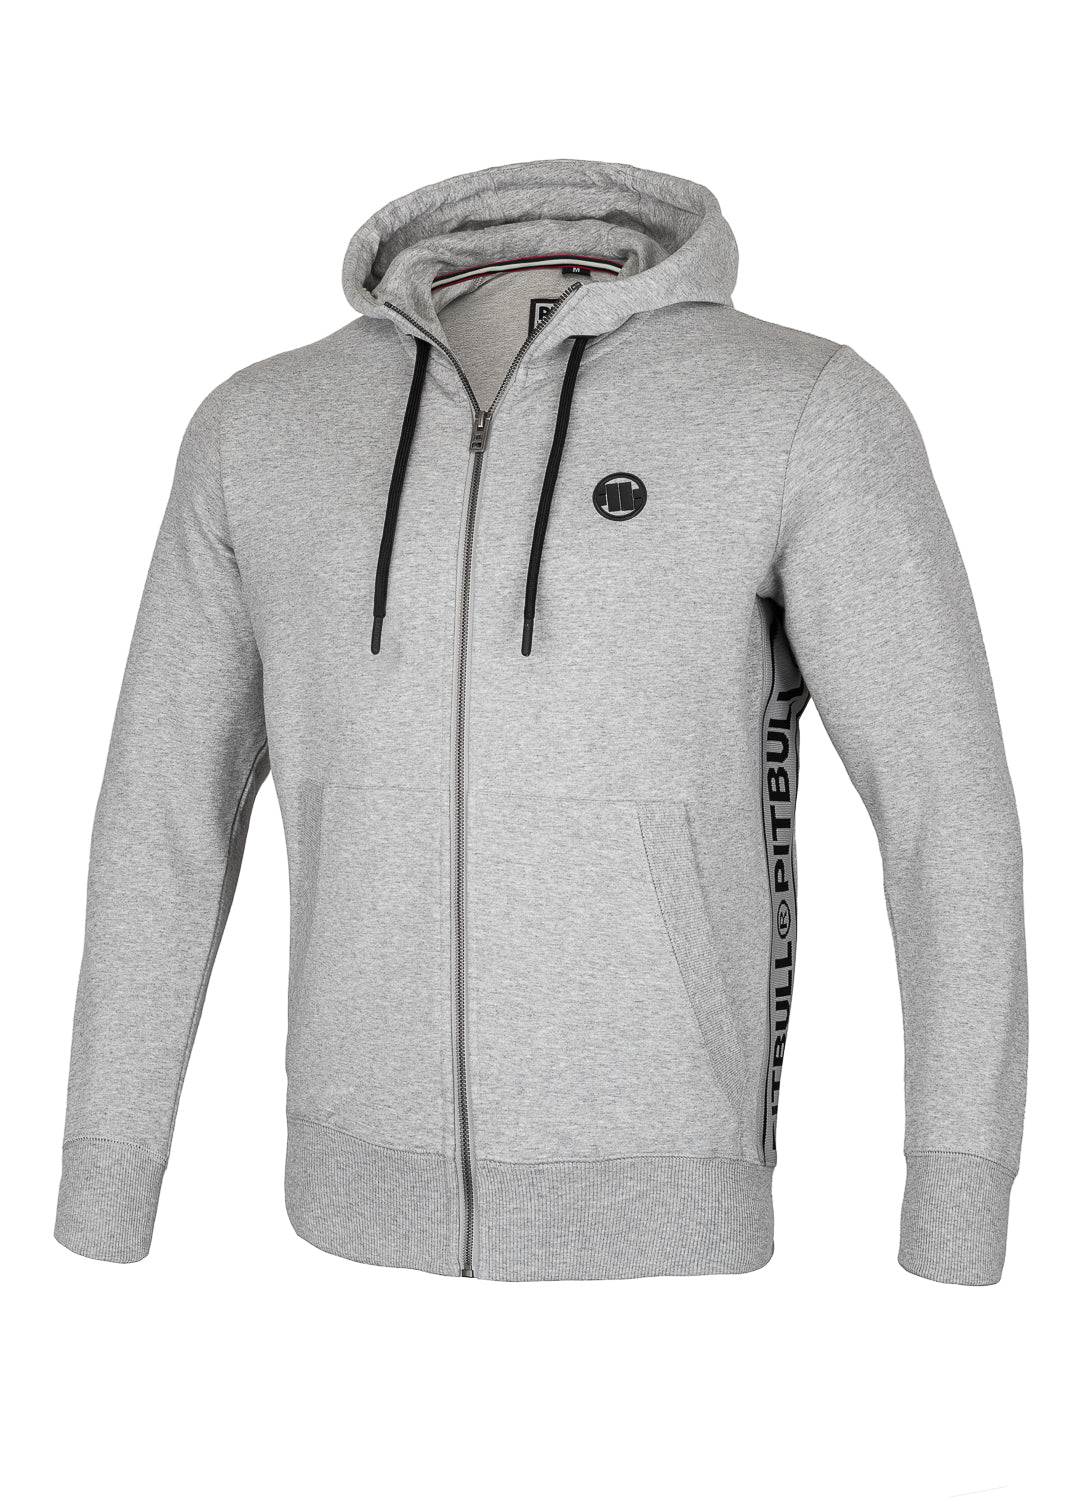 Hooded Zip French Terry RENO Grey